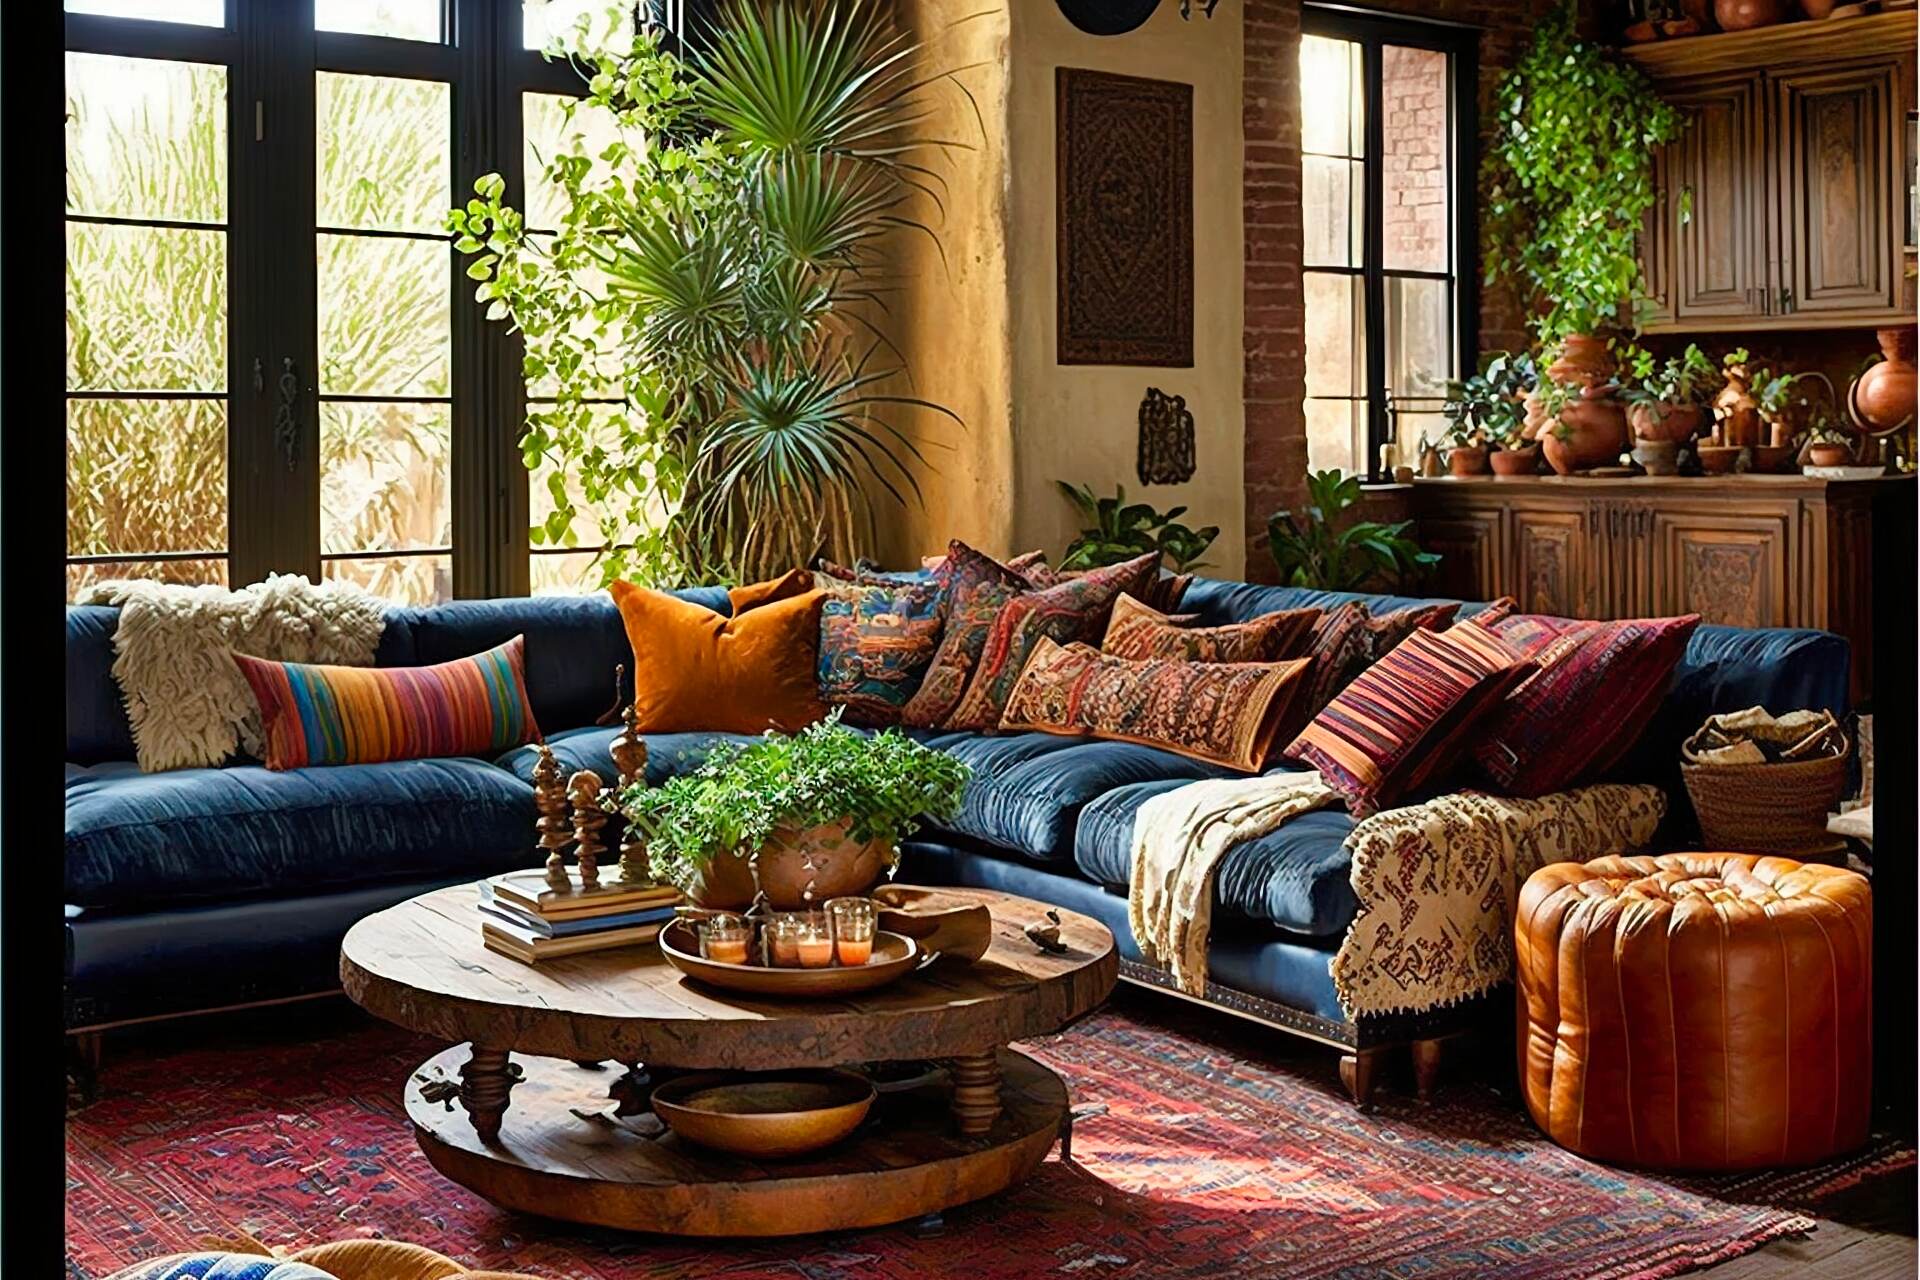 This Bohemian Living Room Is A Study In Textural Contrasts. A Vintage Moroccan Rug Anchors The Space, While A Mix Of Plush Velvet And Woven Furniture Pieces Add Depth And Interest. A Large Woven Wall Hanging Serves As The Focal Point, While A Collection Of Colorful Pottery And Lush Greenery Add A Touch Of Bohemian Flair.